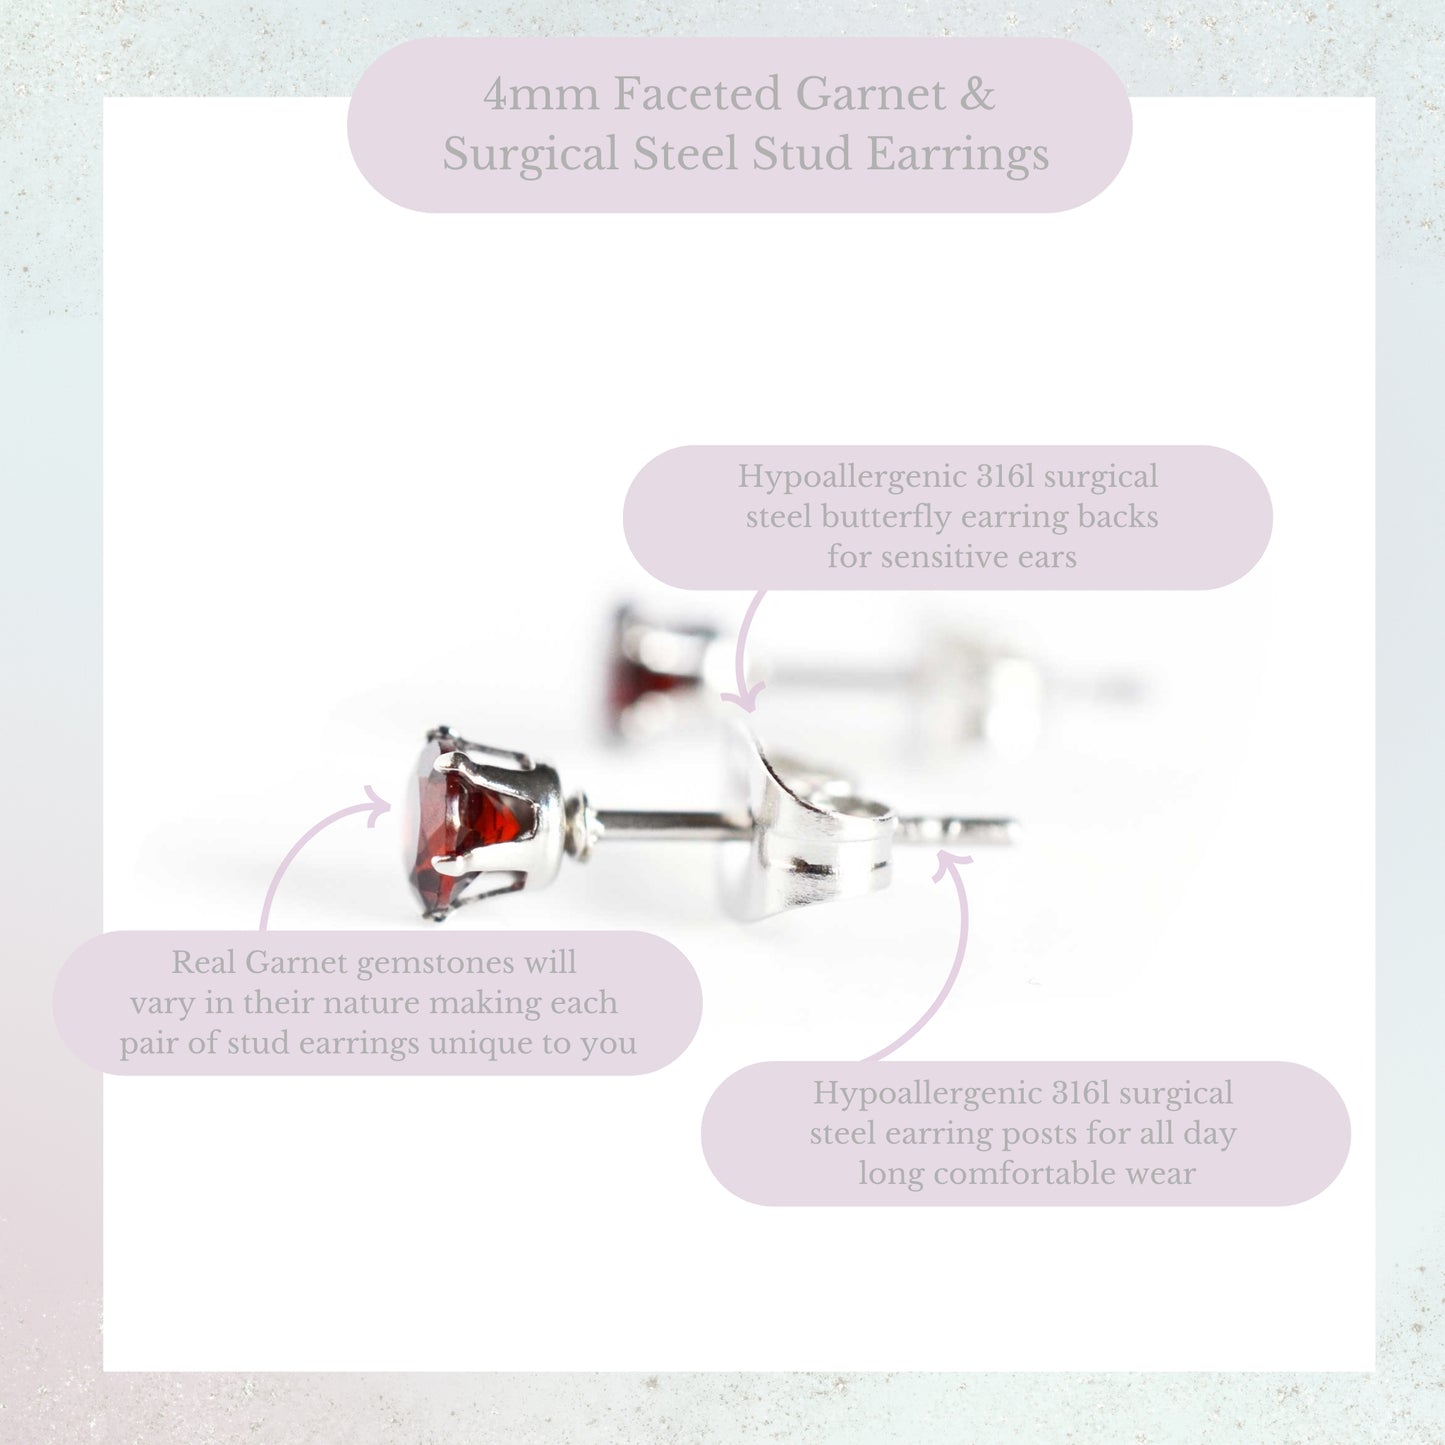 Product information graphic for 4mm faceted Garnet stud earrings